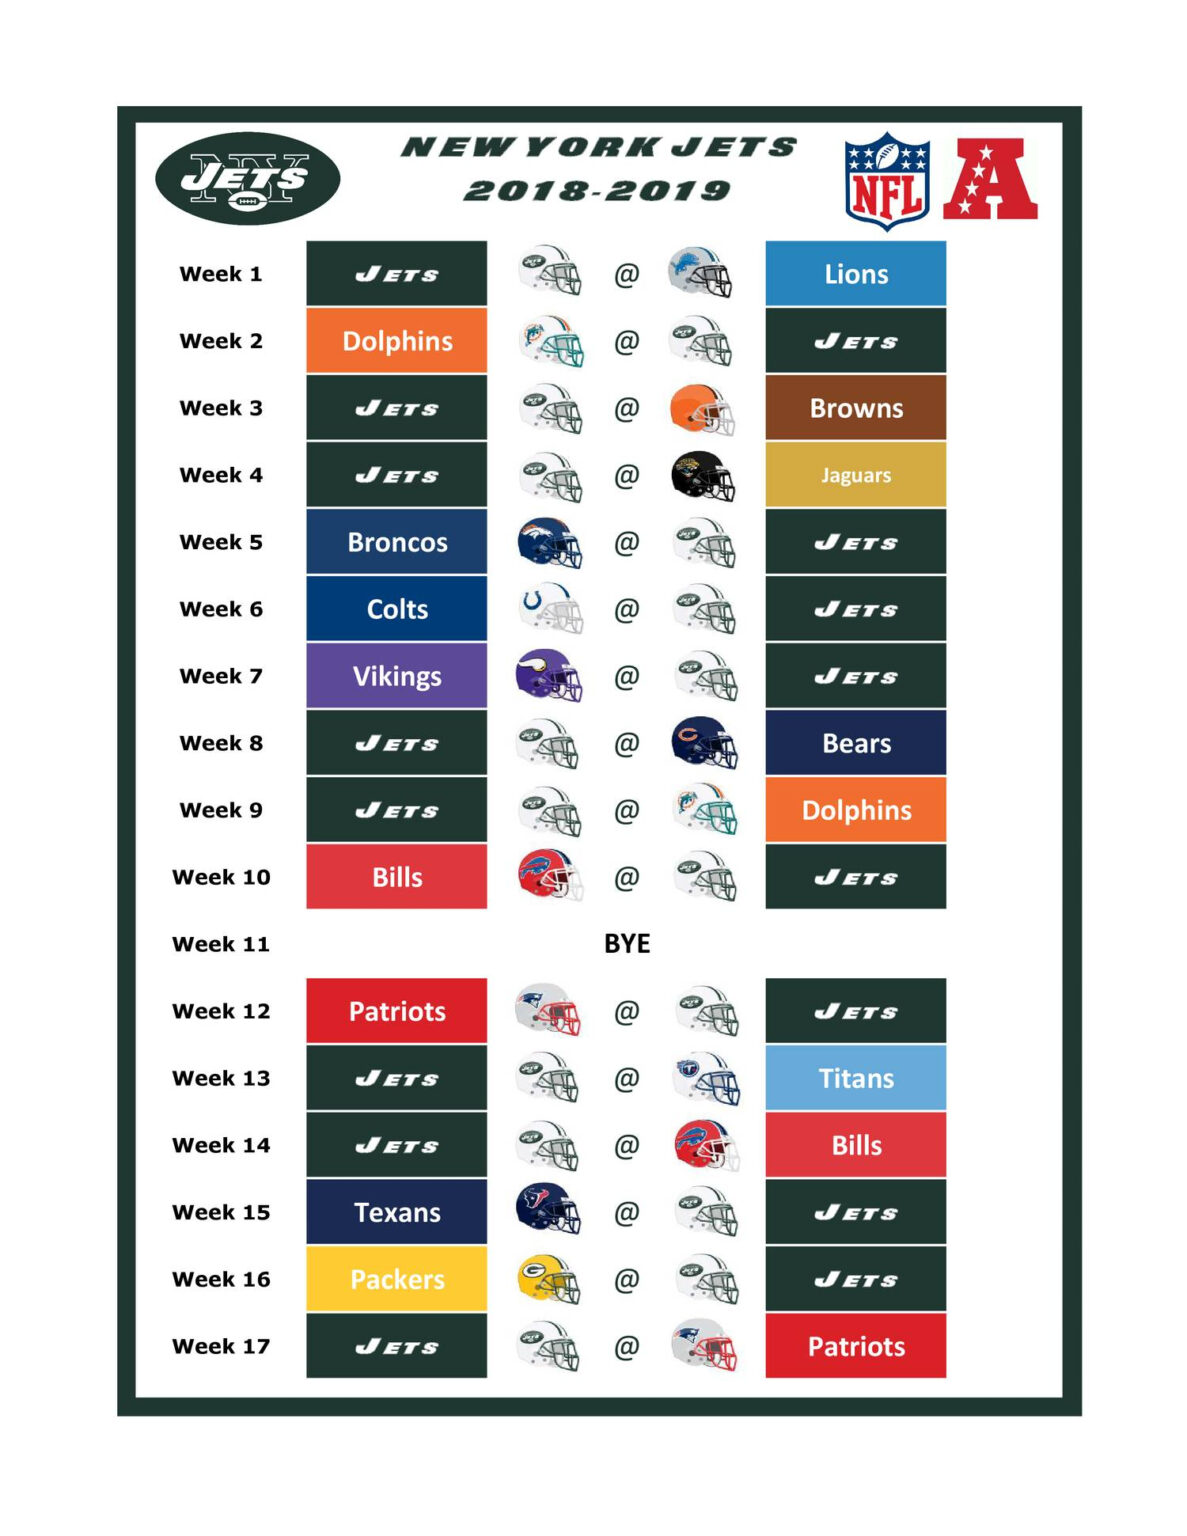 NY JETS Schedule Pdf DocDroid Printable Schedule